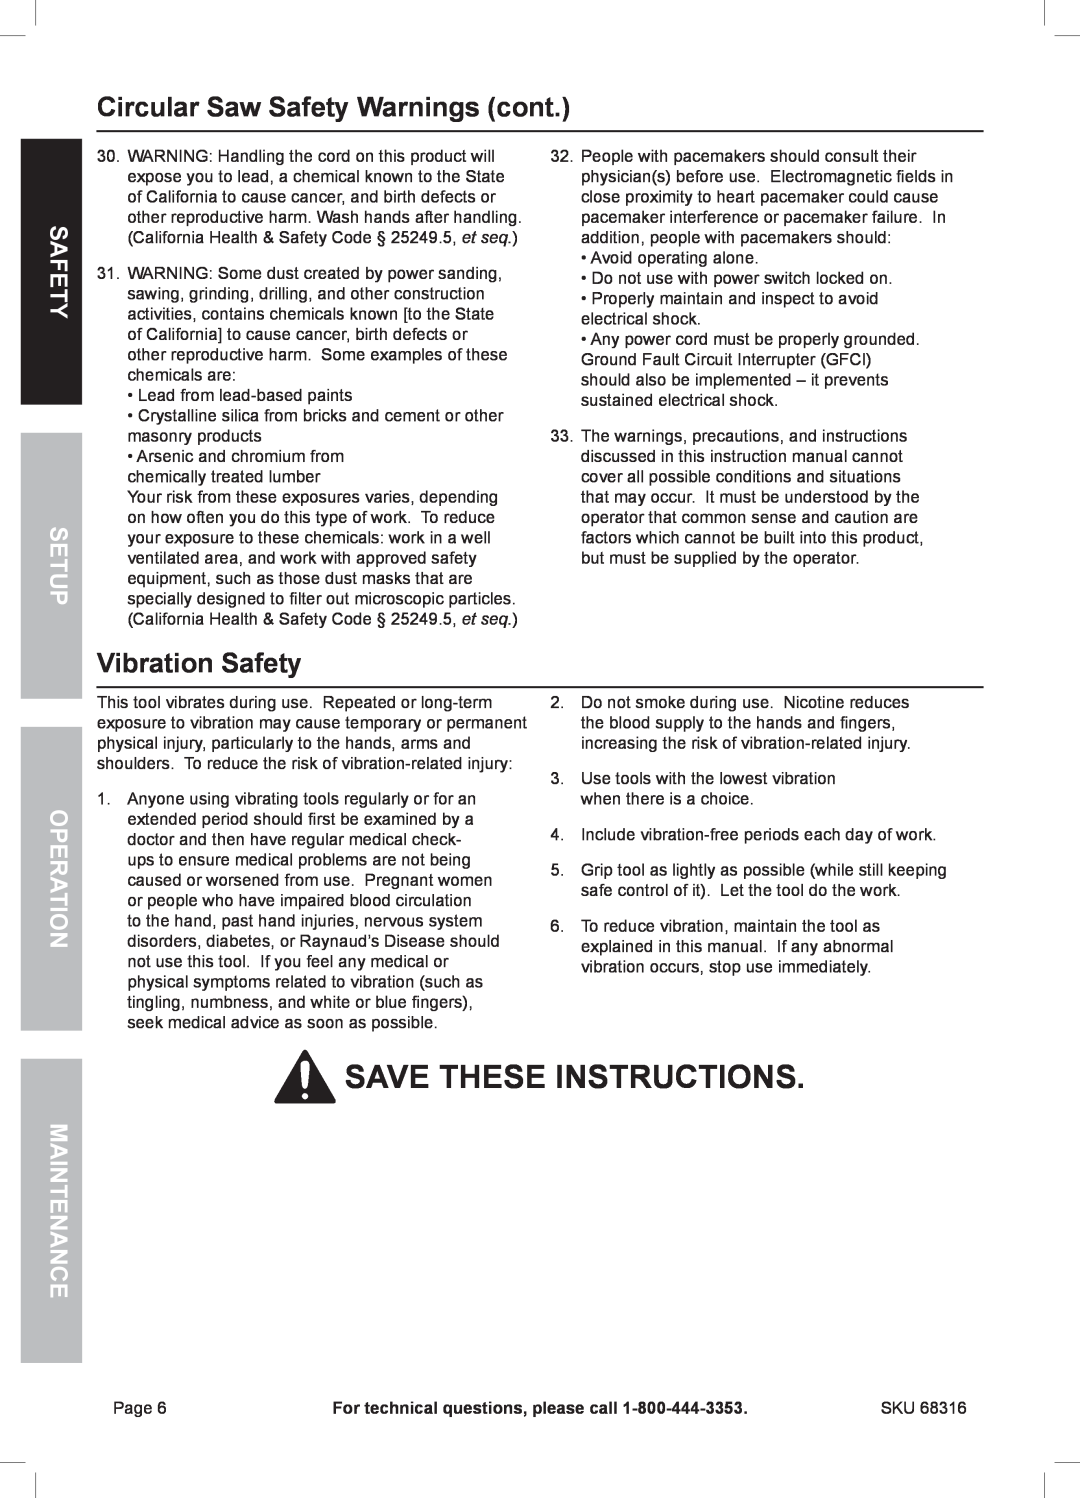 Chicago Electric 68316 Vibration Safety, Save These Instructions, Circular Saw Safety Warnings cont, Safety Setup 